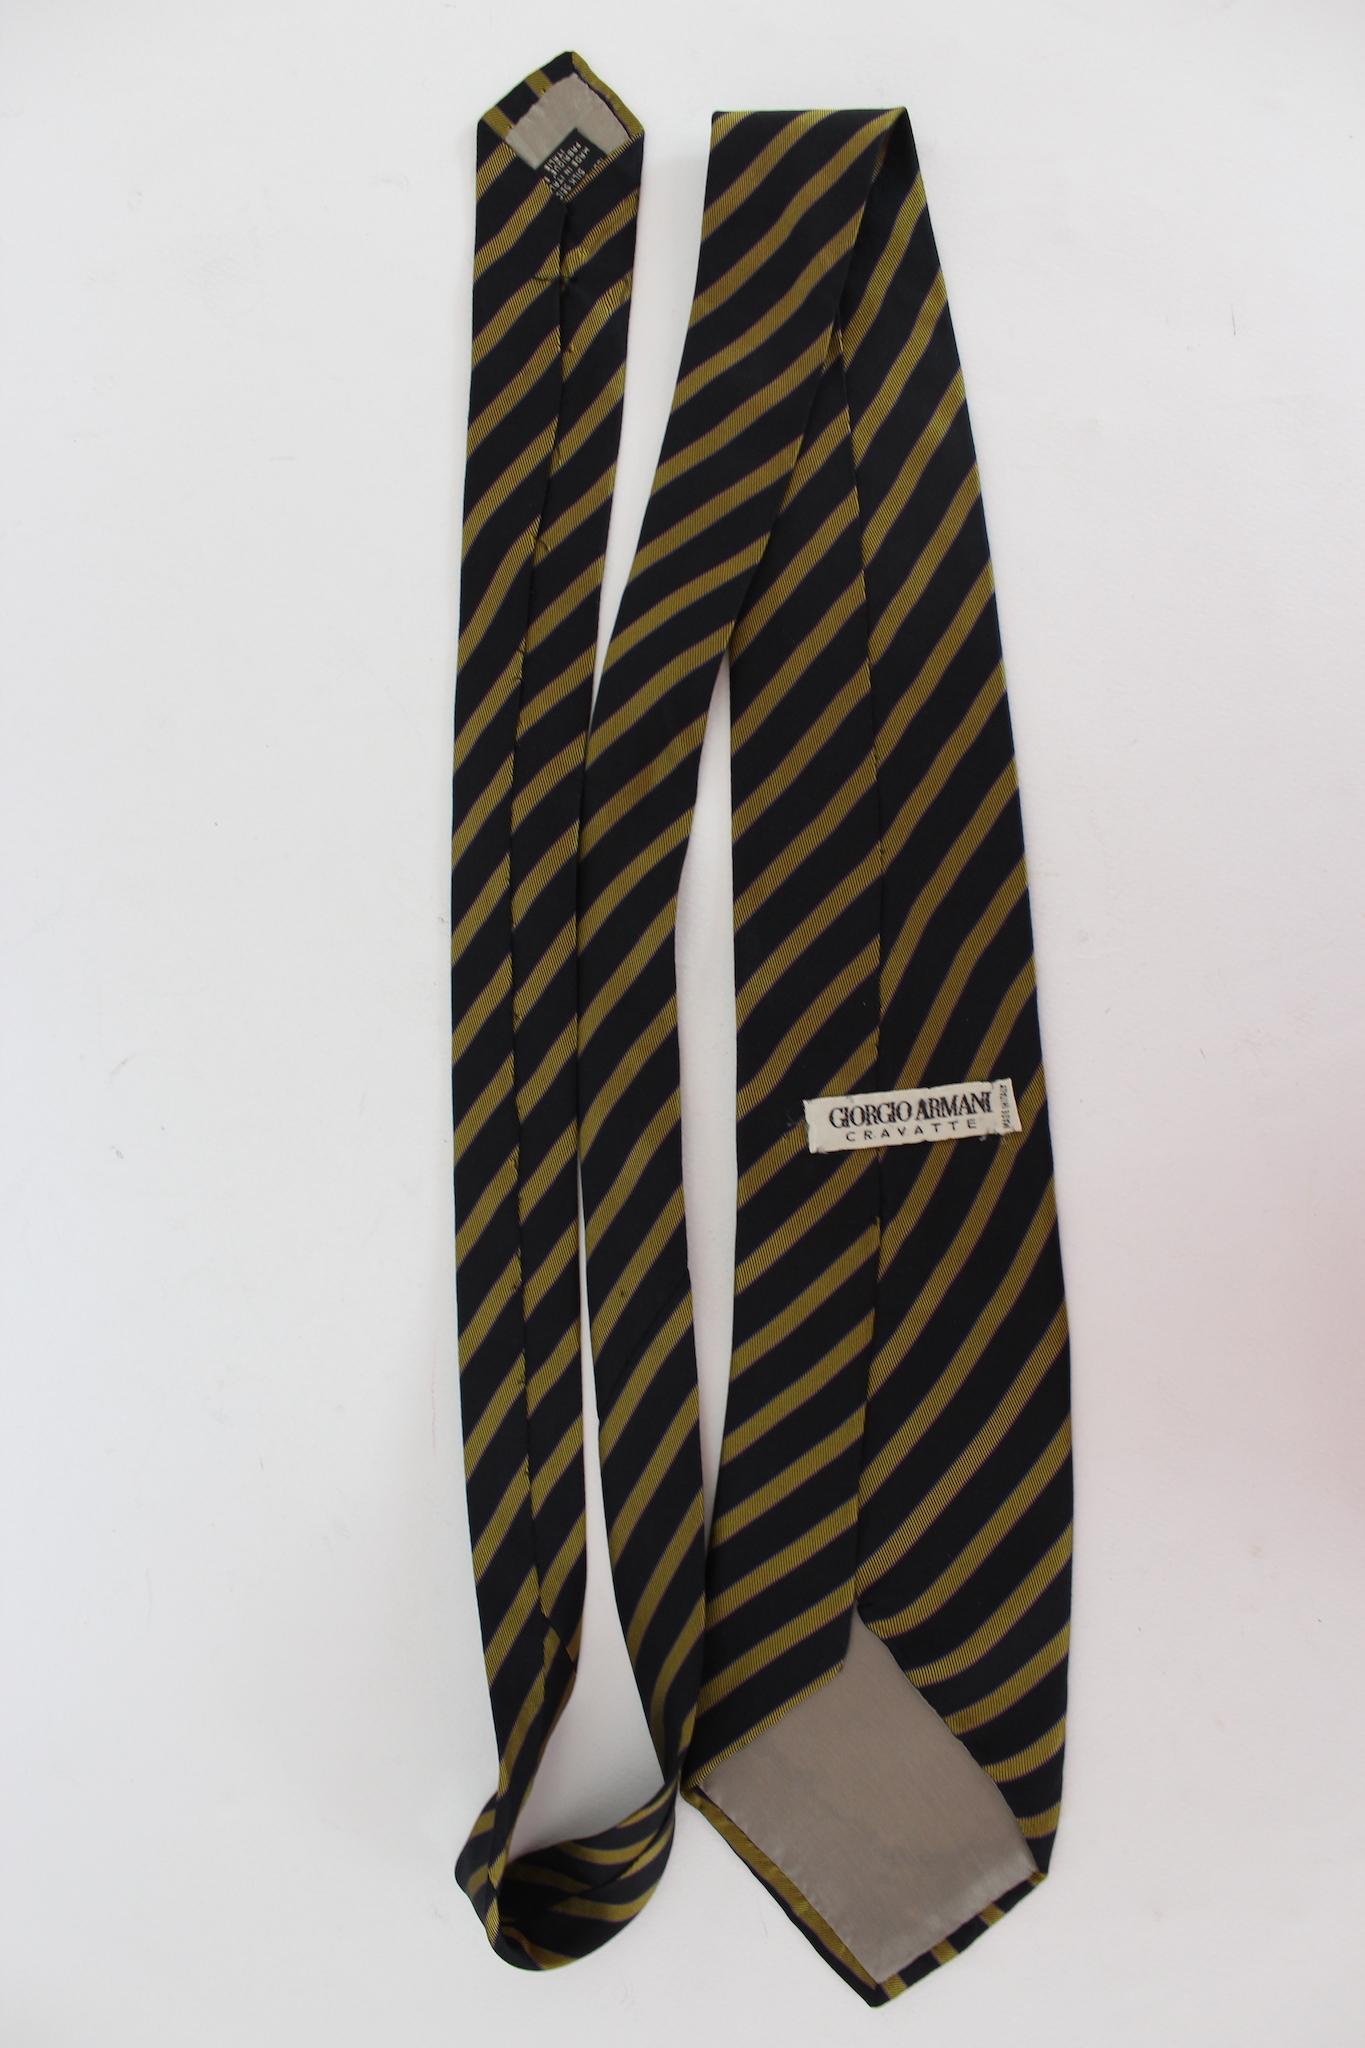 Vintage Giorgio Armani tie from the 2000s. Blue and yellow, striped pattern. 100% silk fabric. Made in Italy.

Length: 150 cm
Width: 9 cm